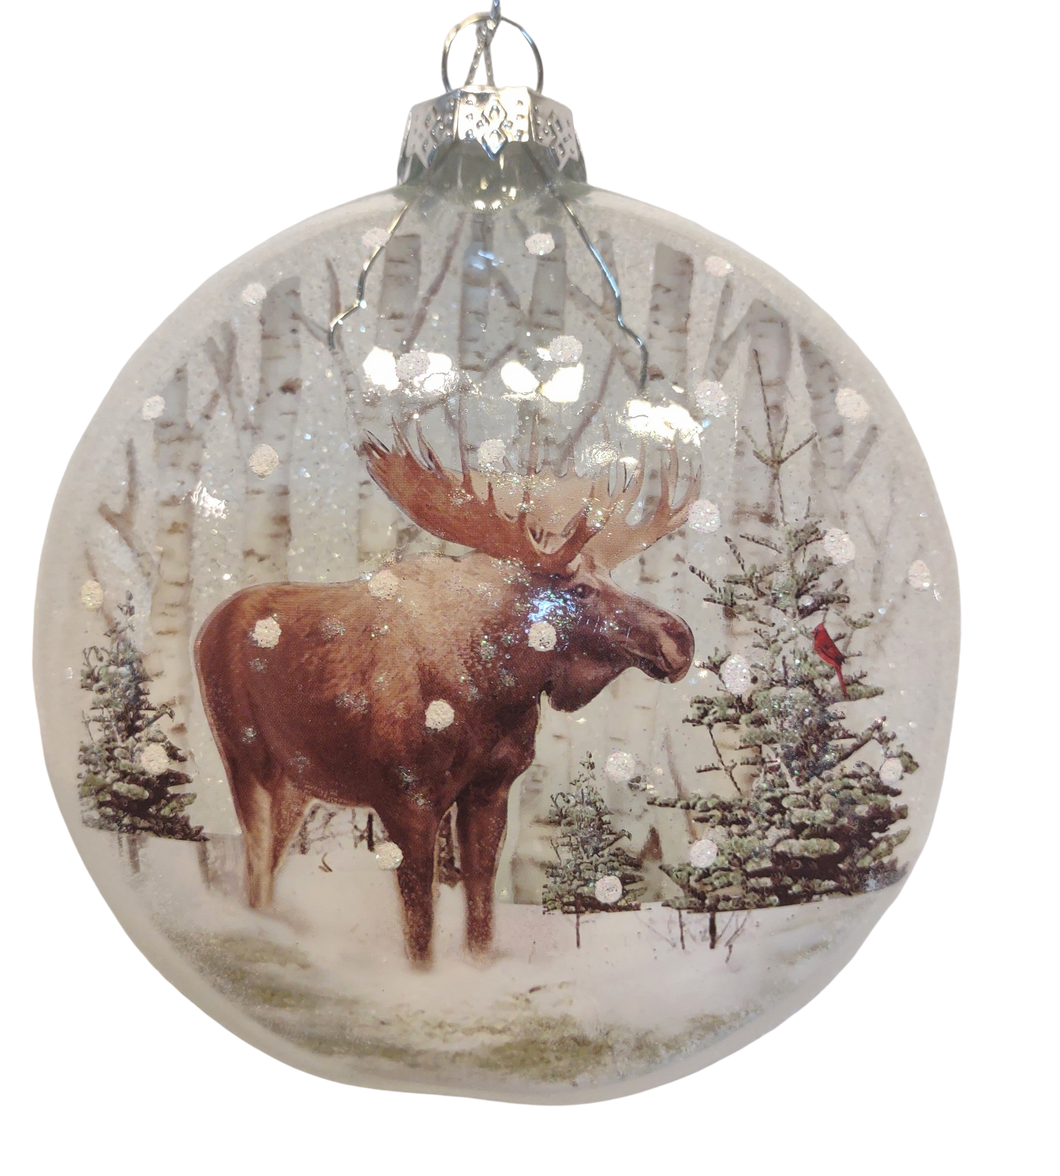 Get in the Christmas Spirit with the Moose Glass